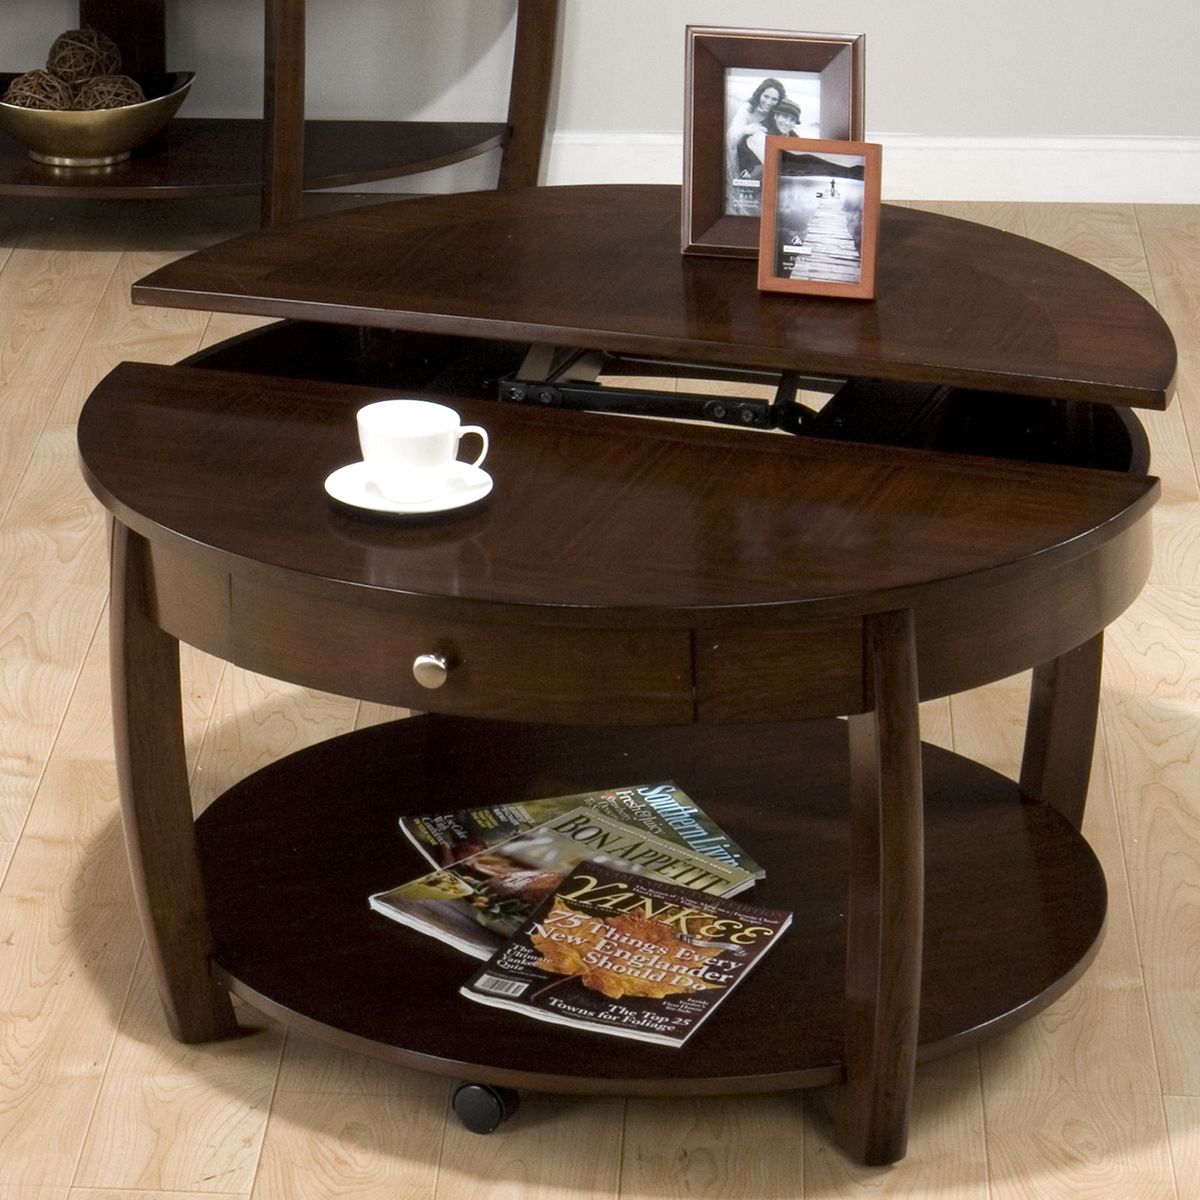 The Round Coffee Tables With Storage – The Simple And Compact Furniture Intended For Coffee Tables With Storage (View 9 of 15)